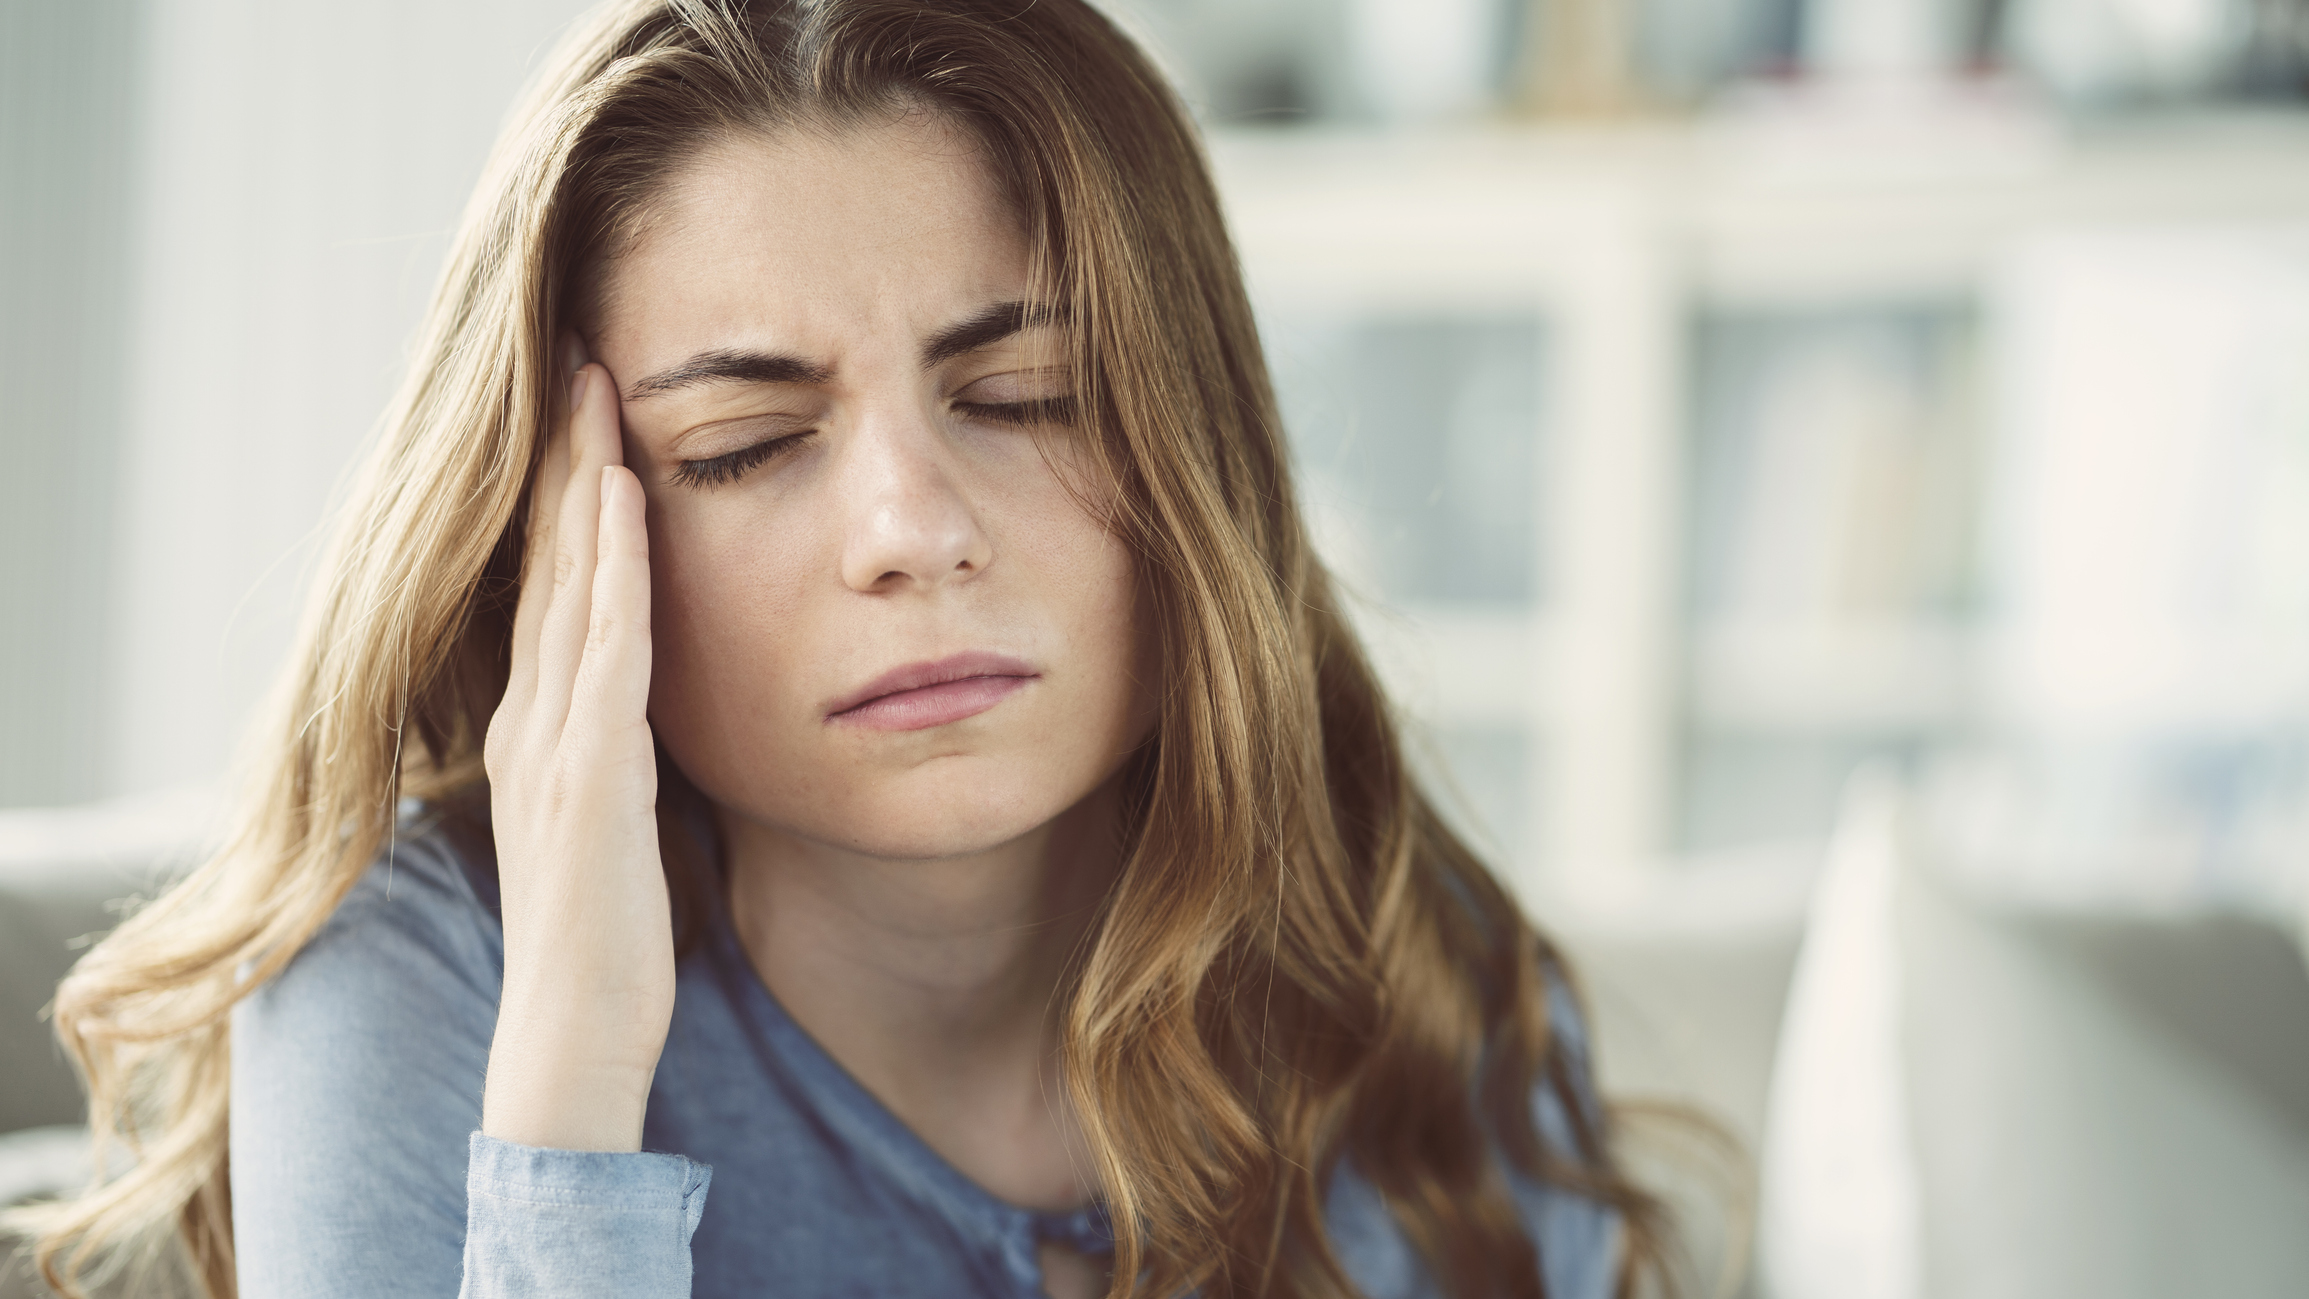 Why Choose an Urgent Care for Headache Treatment in Lafayette?